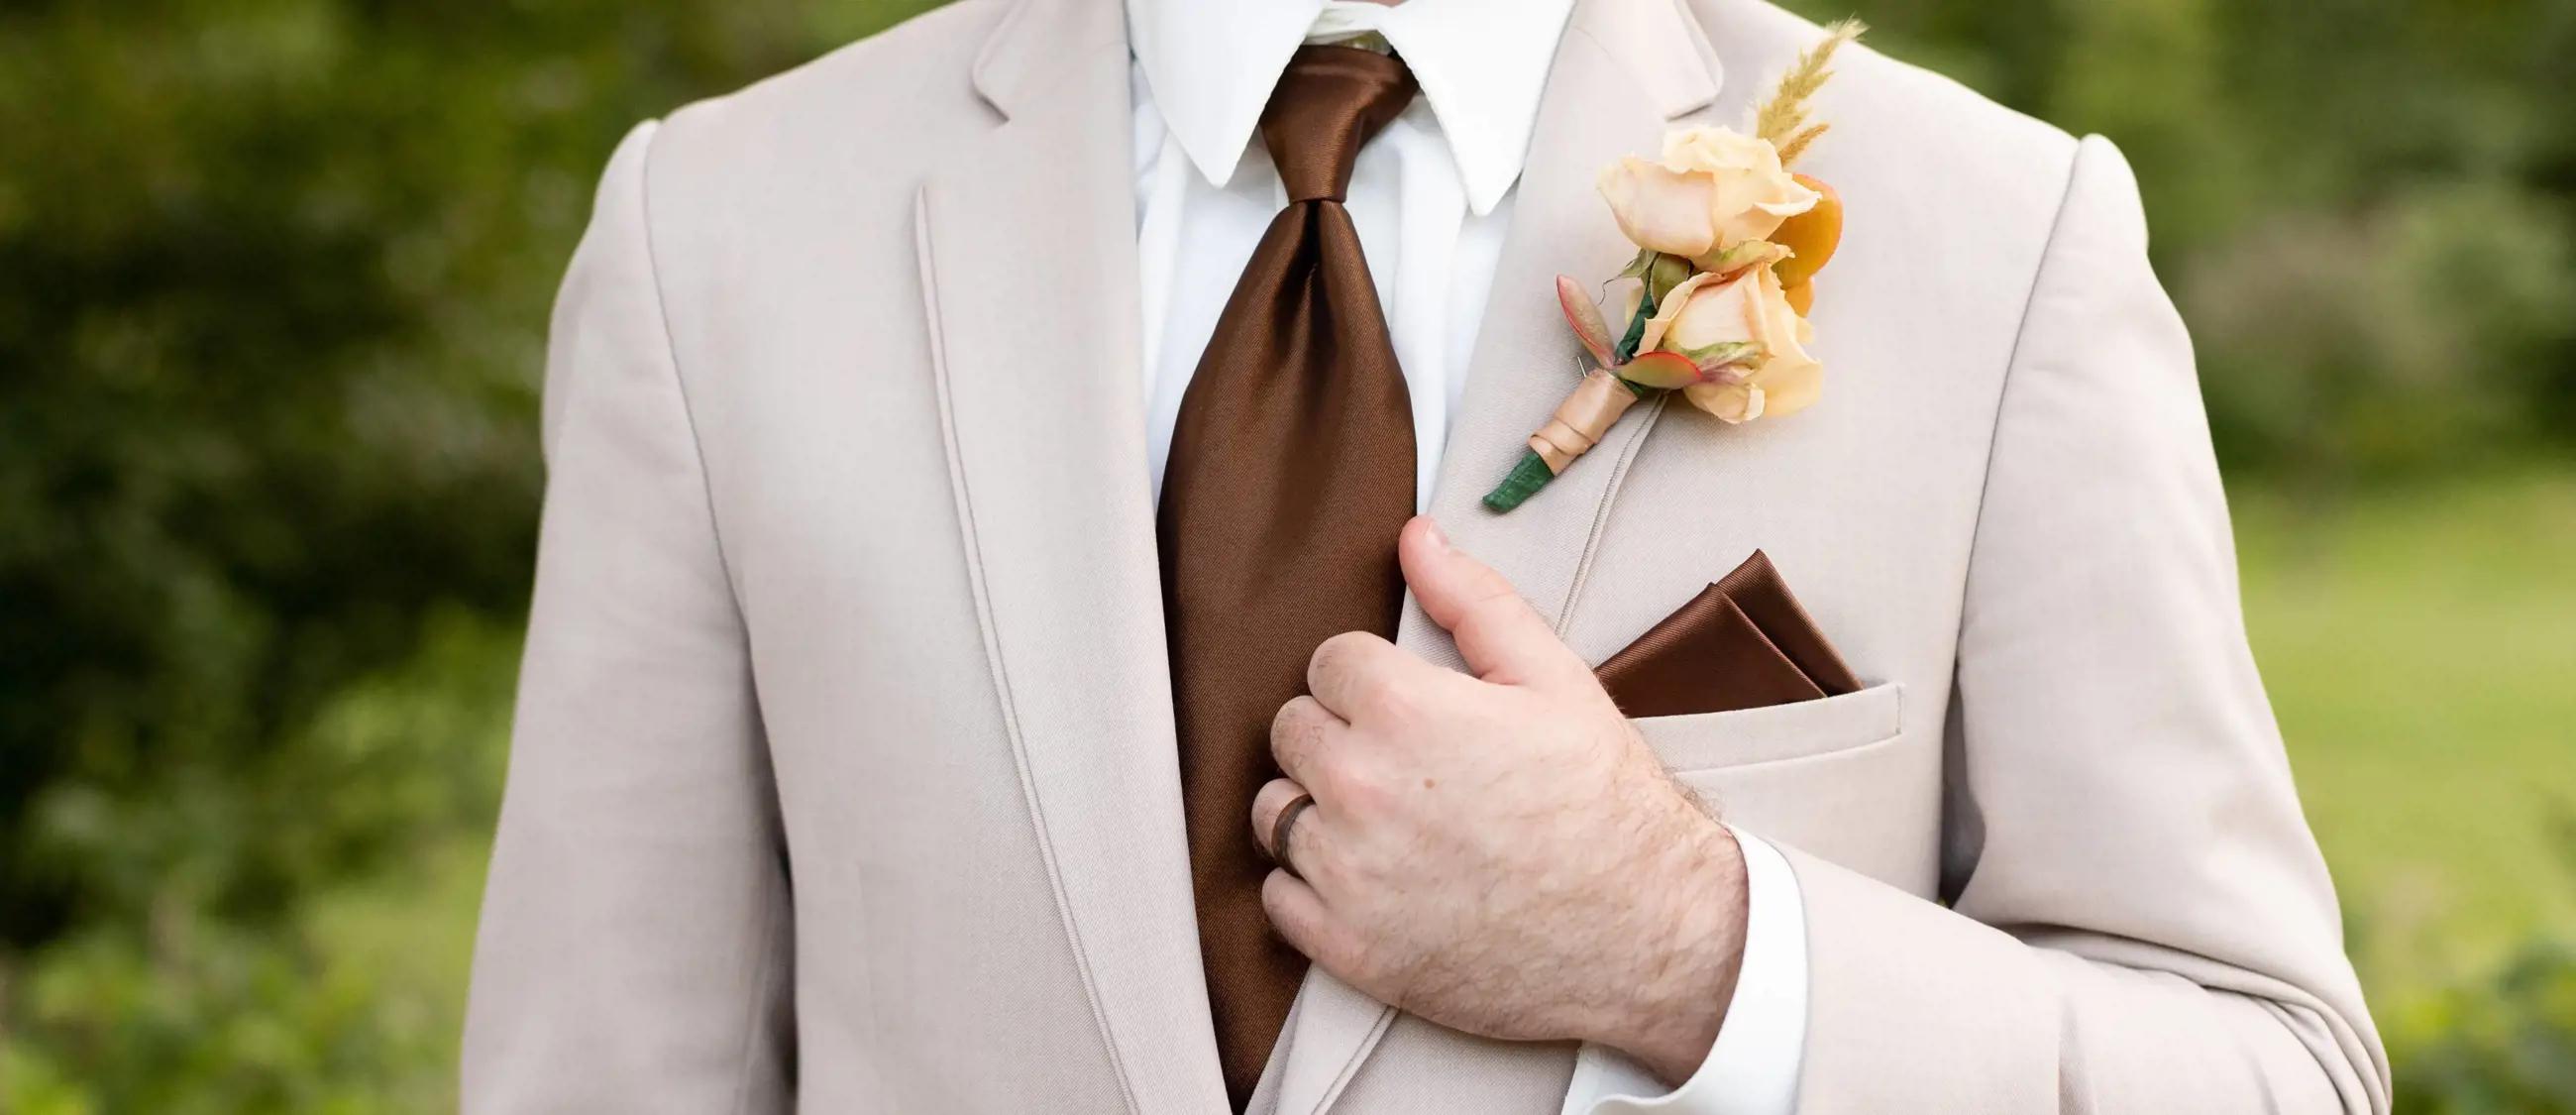 Male model wearing tuxedo and brown bow tie